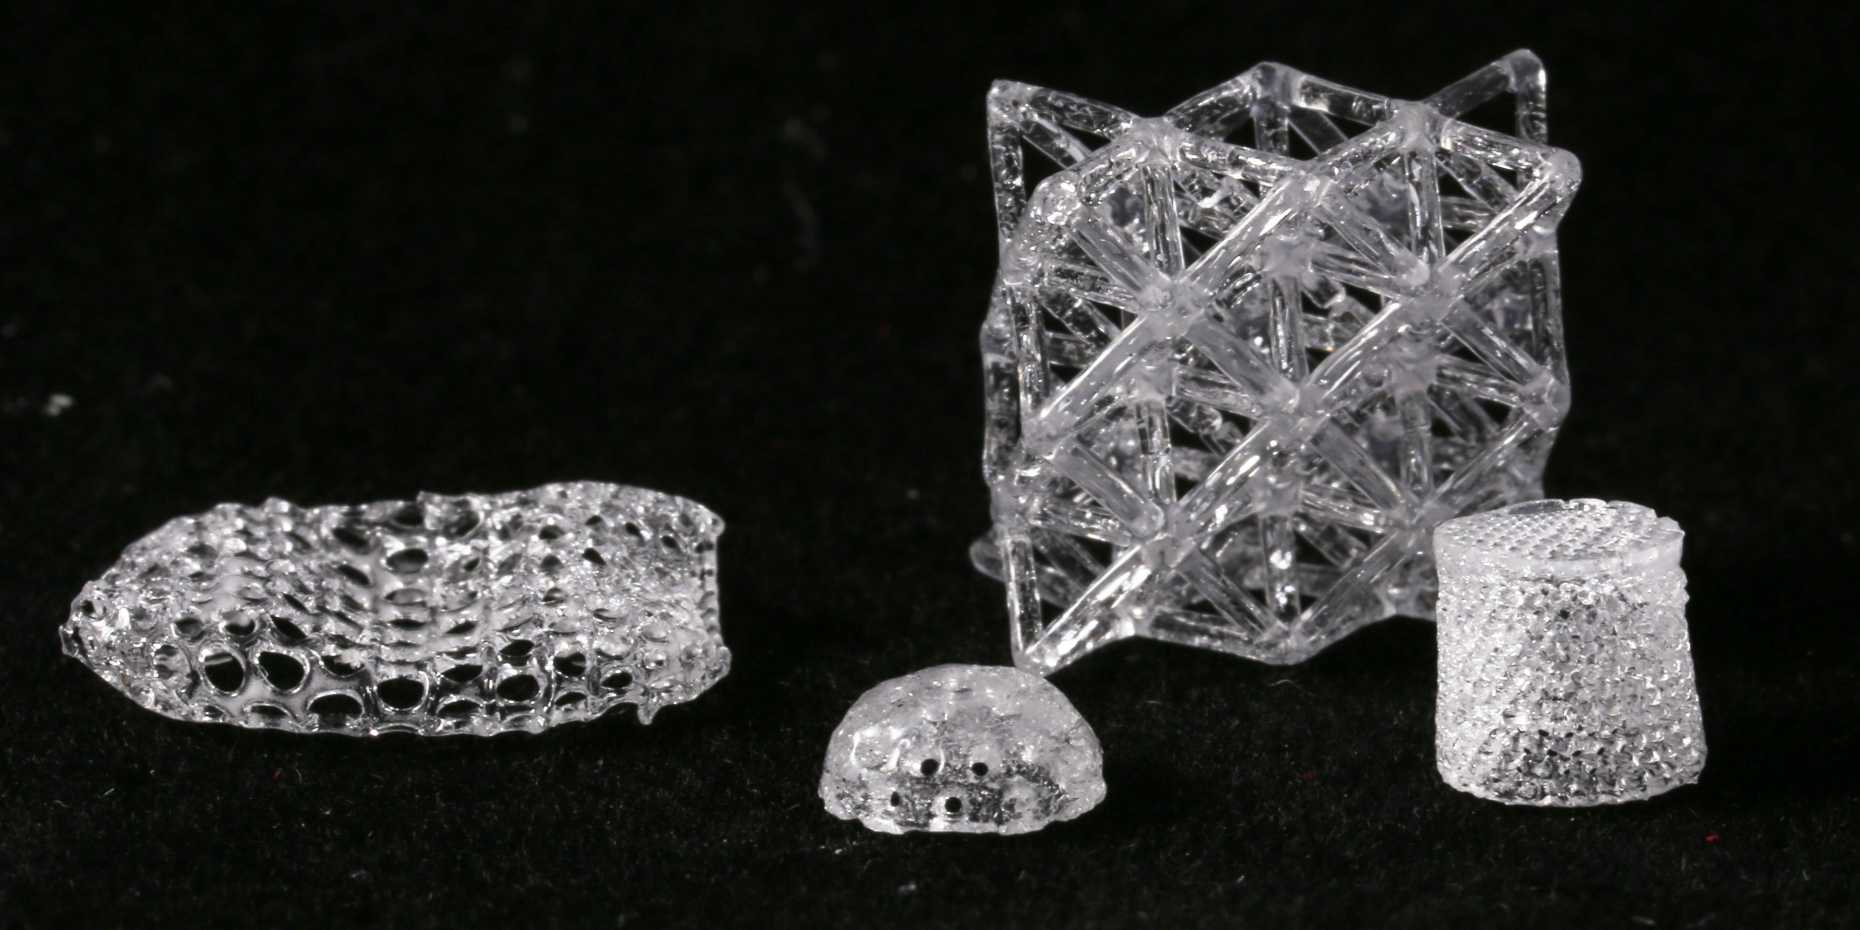 Enlarged view: Various glass objects created with a 3D printer. (Photo: Group for Complex Materials / ETH Zurich)